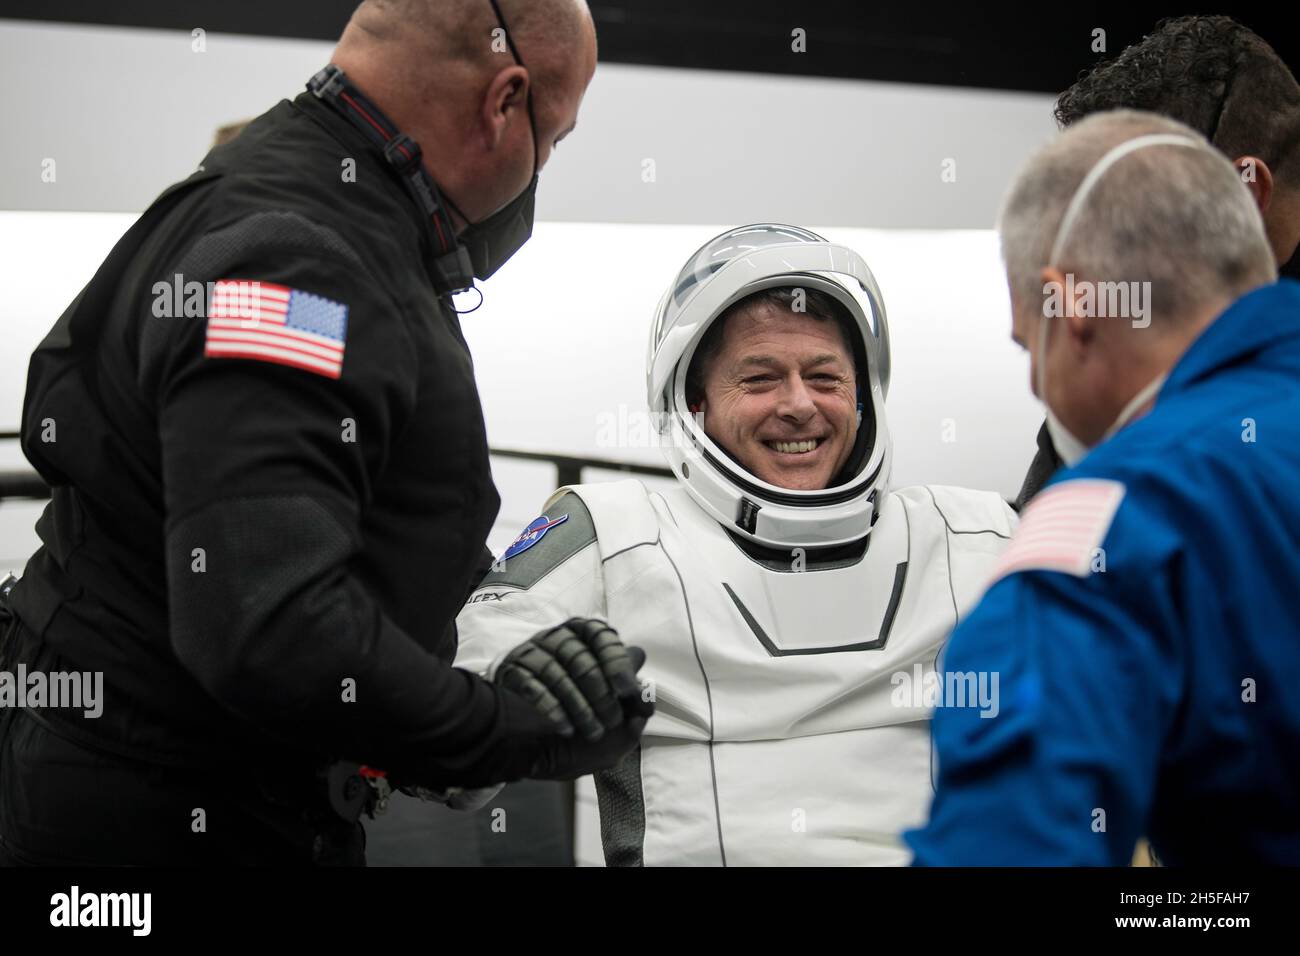 Pensecola, United States Of America. 08th Nov, 2021. Pensecola, United States of America. 08 November, 2021. NASA astronaut Shane Kimbrough, is helped out of the SpaceX Crew Dragon Endeavour spacecraft after splashdown in the Gulf of Mexico November 8, 2021 off the coast of Pensecola, Florida. The capsule carried SpaceX Crew-2 NASA astronauts Shane Kimbrough, Megan McArthur, JAXA astronaut Aki Hoshide, and ESA astronaut Thomas Pesquet back to earth from the International Space Station. Credit: Aubrey Gemignani/NASA/Alamy Live News Stock Photo